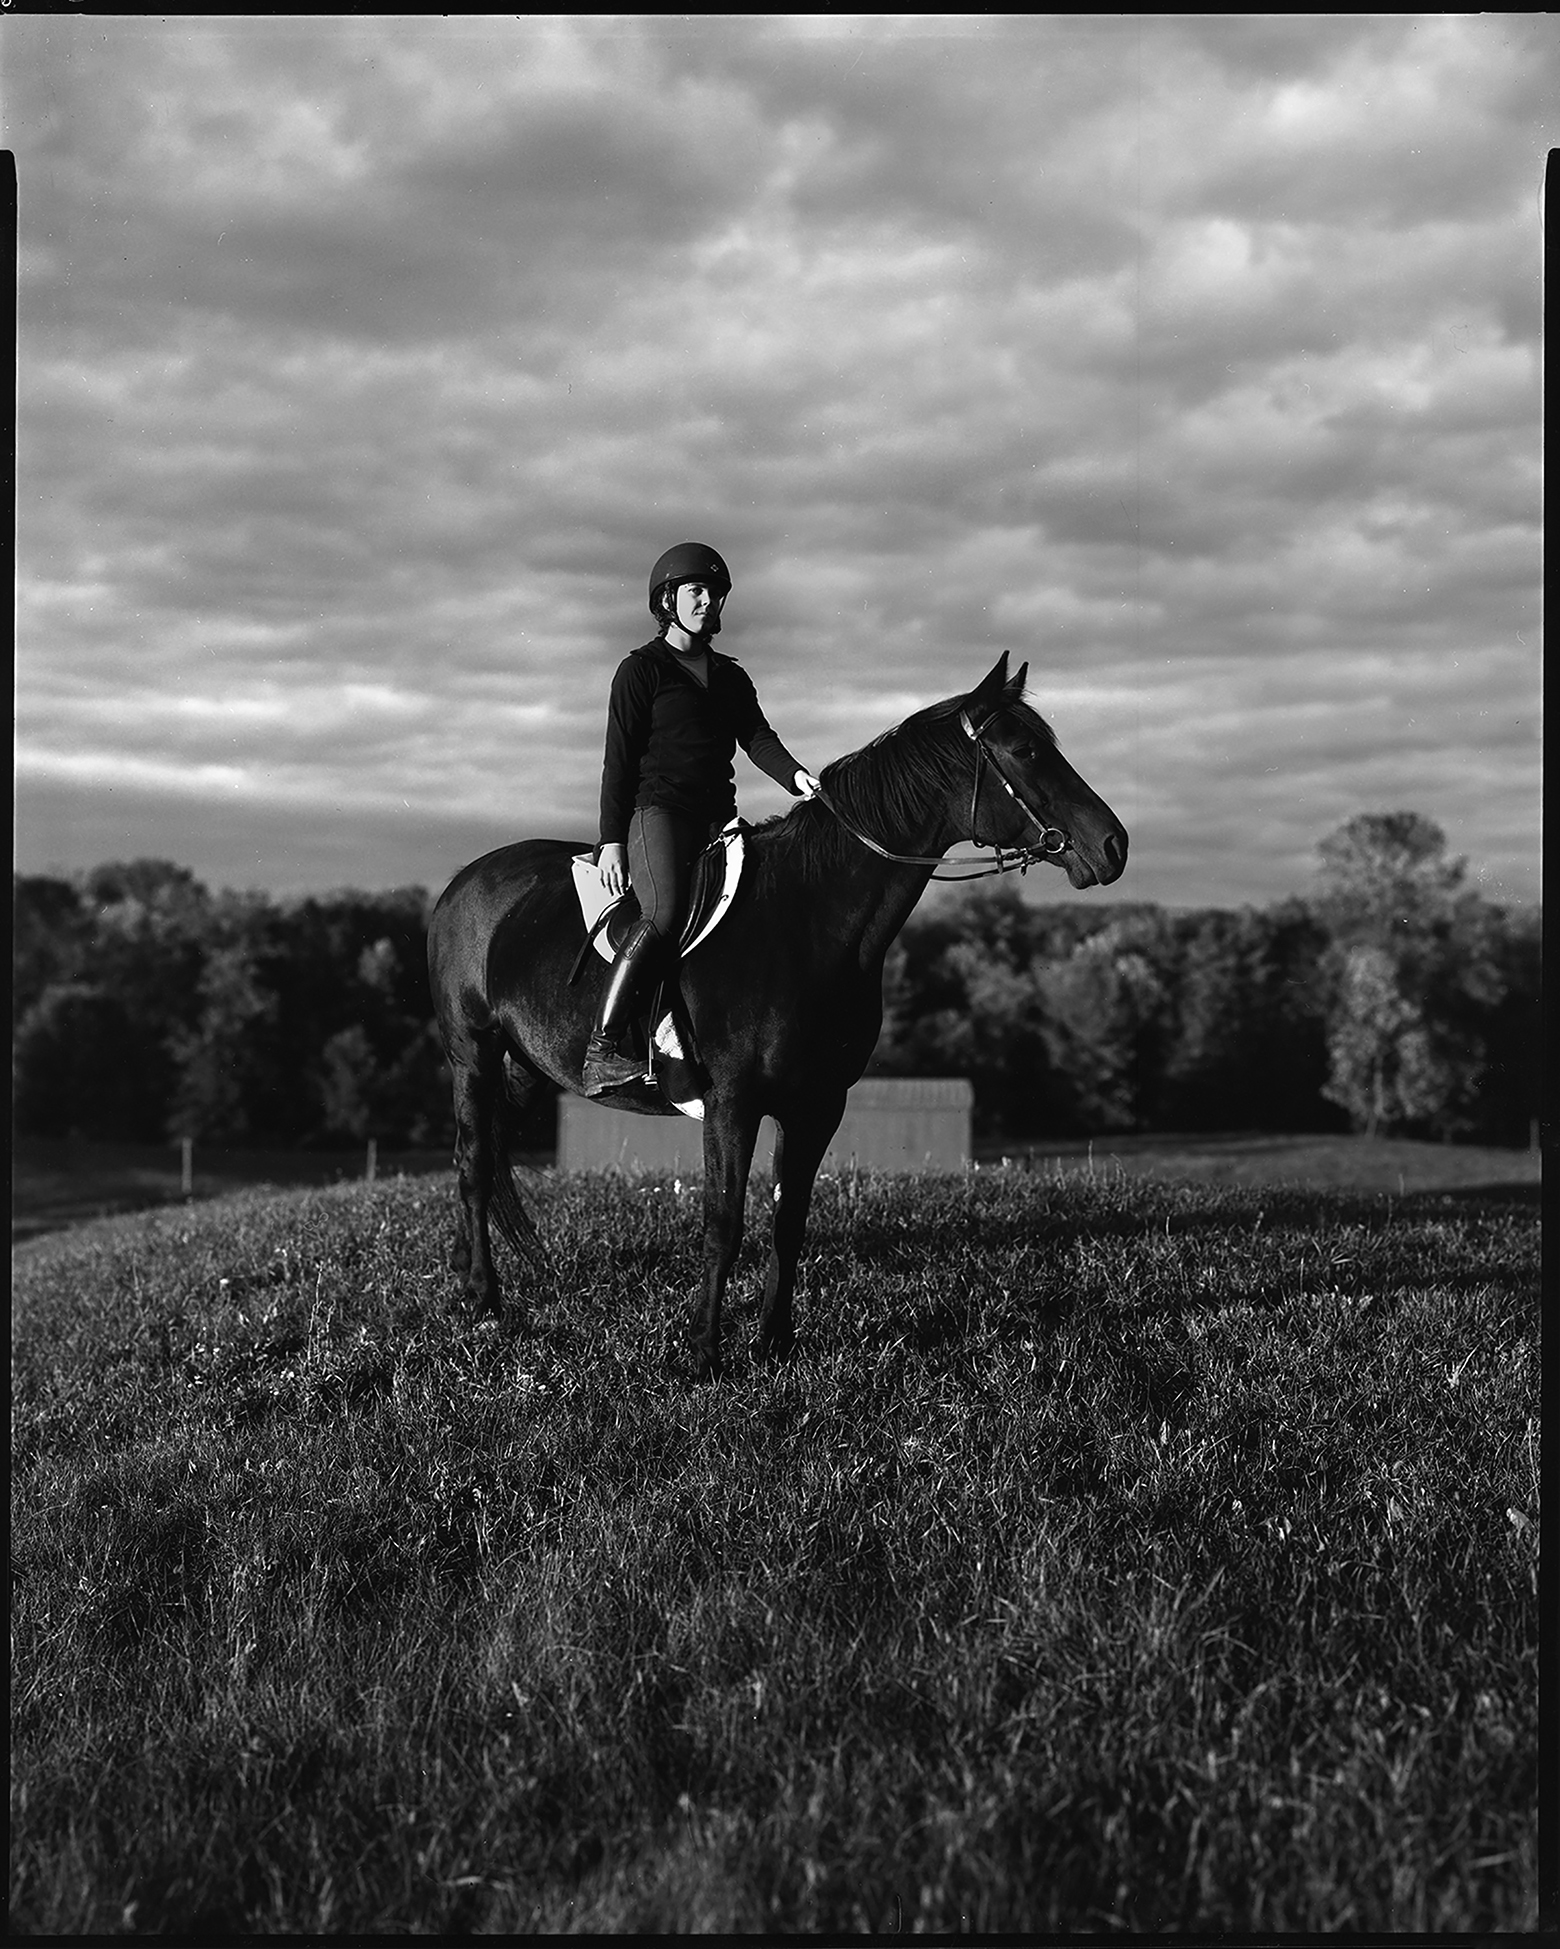 Saxon sits atop Peazie, a horse, in profile in a meadow in North Hero, Vermont, with many trees in the background on a cloudy day. Saxon wears riding boots and a helmet while looking toward the camera.